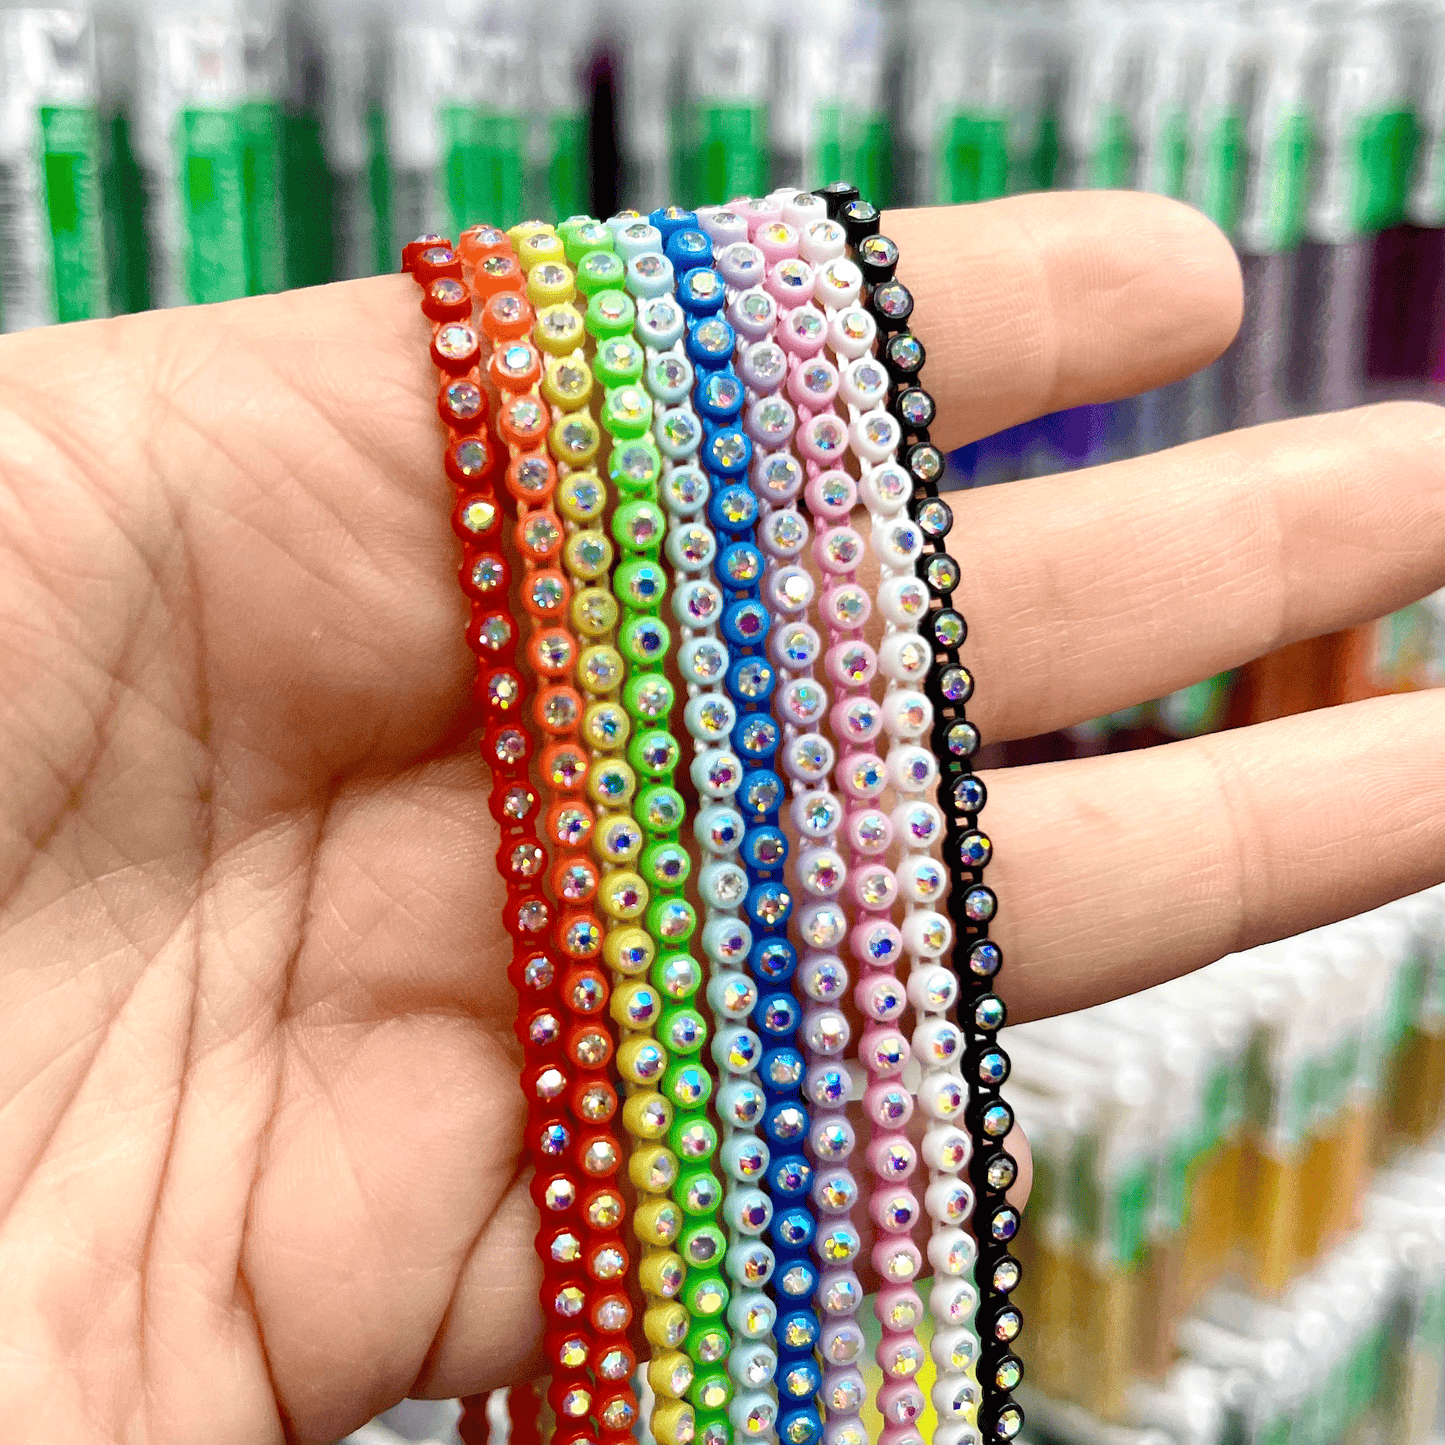 Sundaylace Creations & Bling Promotions Rainbow AB Mix SS6 Surprise Kit: 10 Yards of AB Mixed Plastic Rhinestone Rope Banding (Sold in 36")